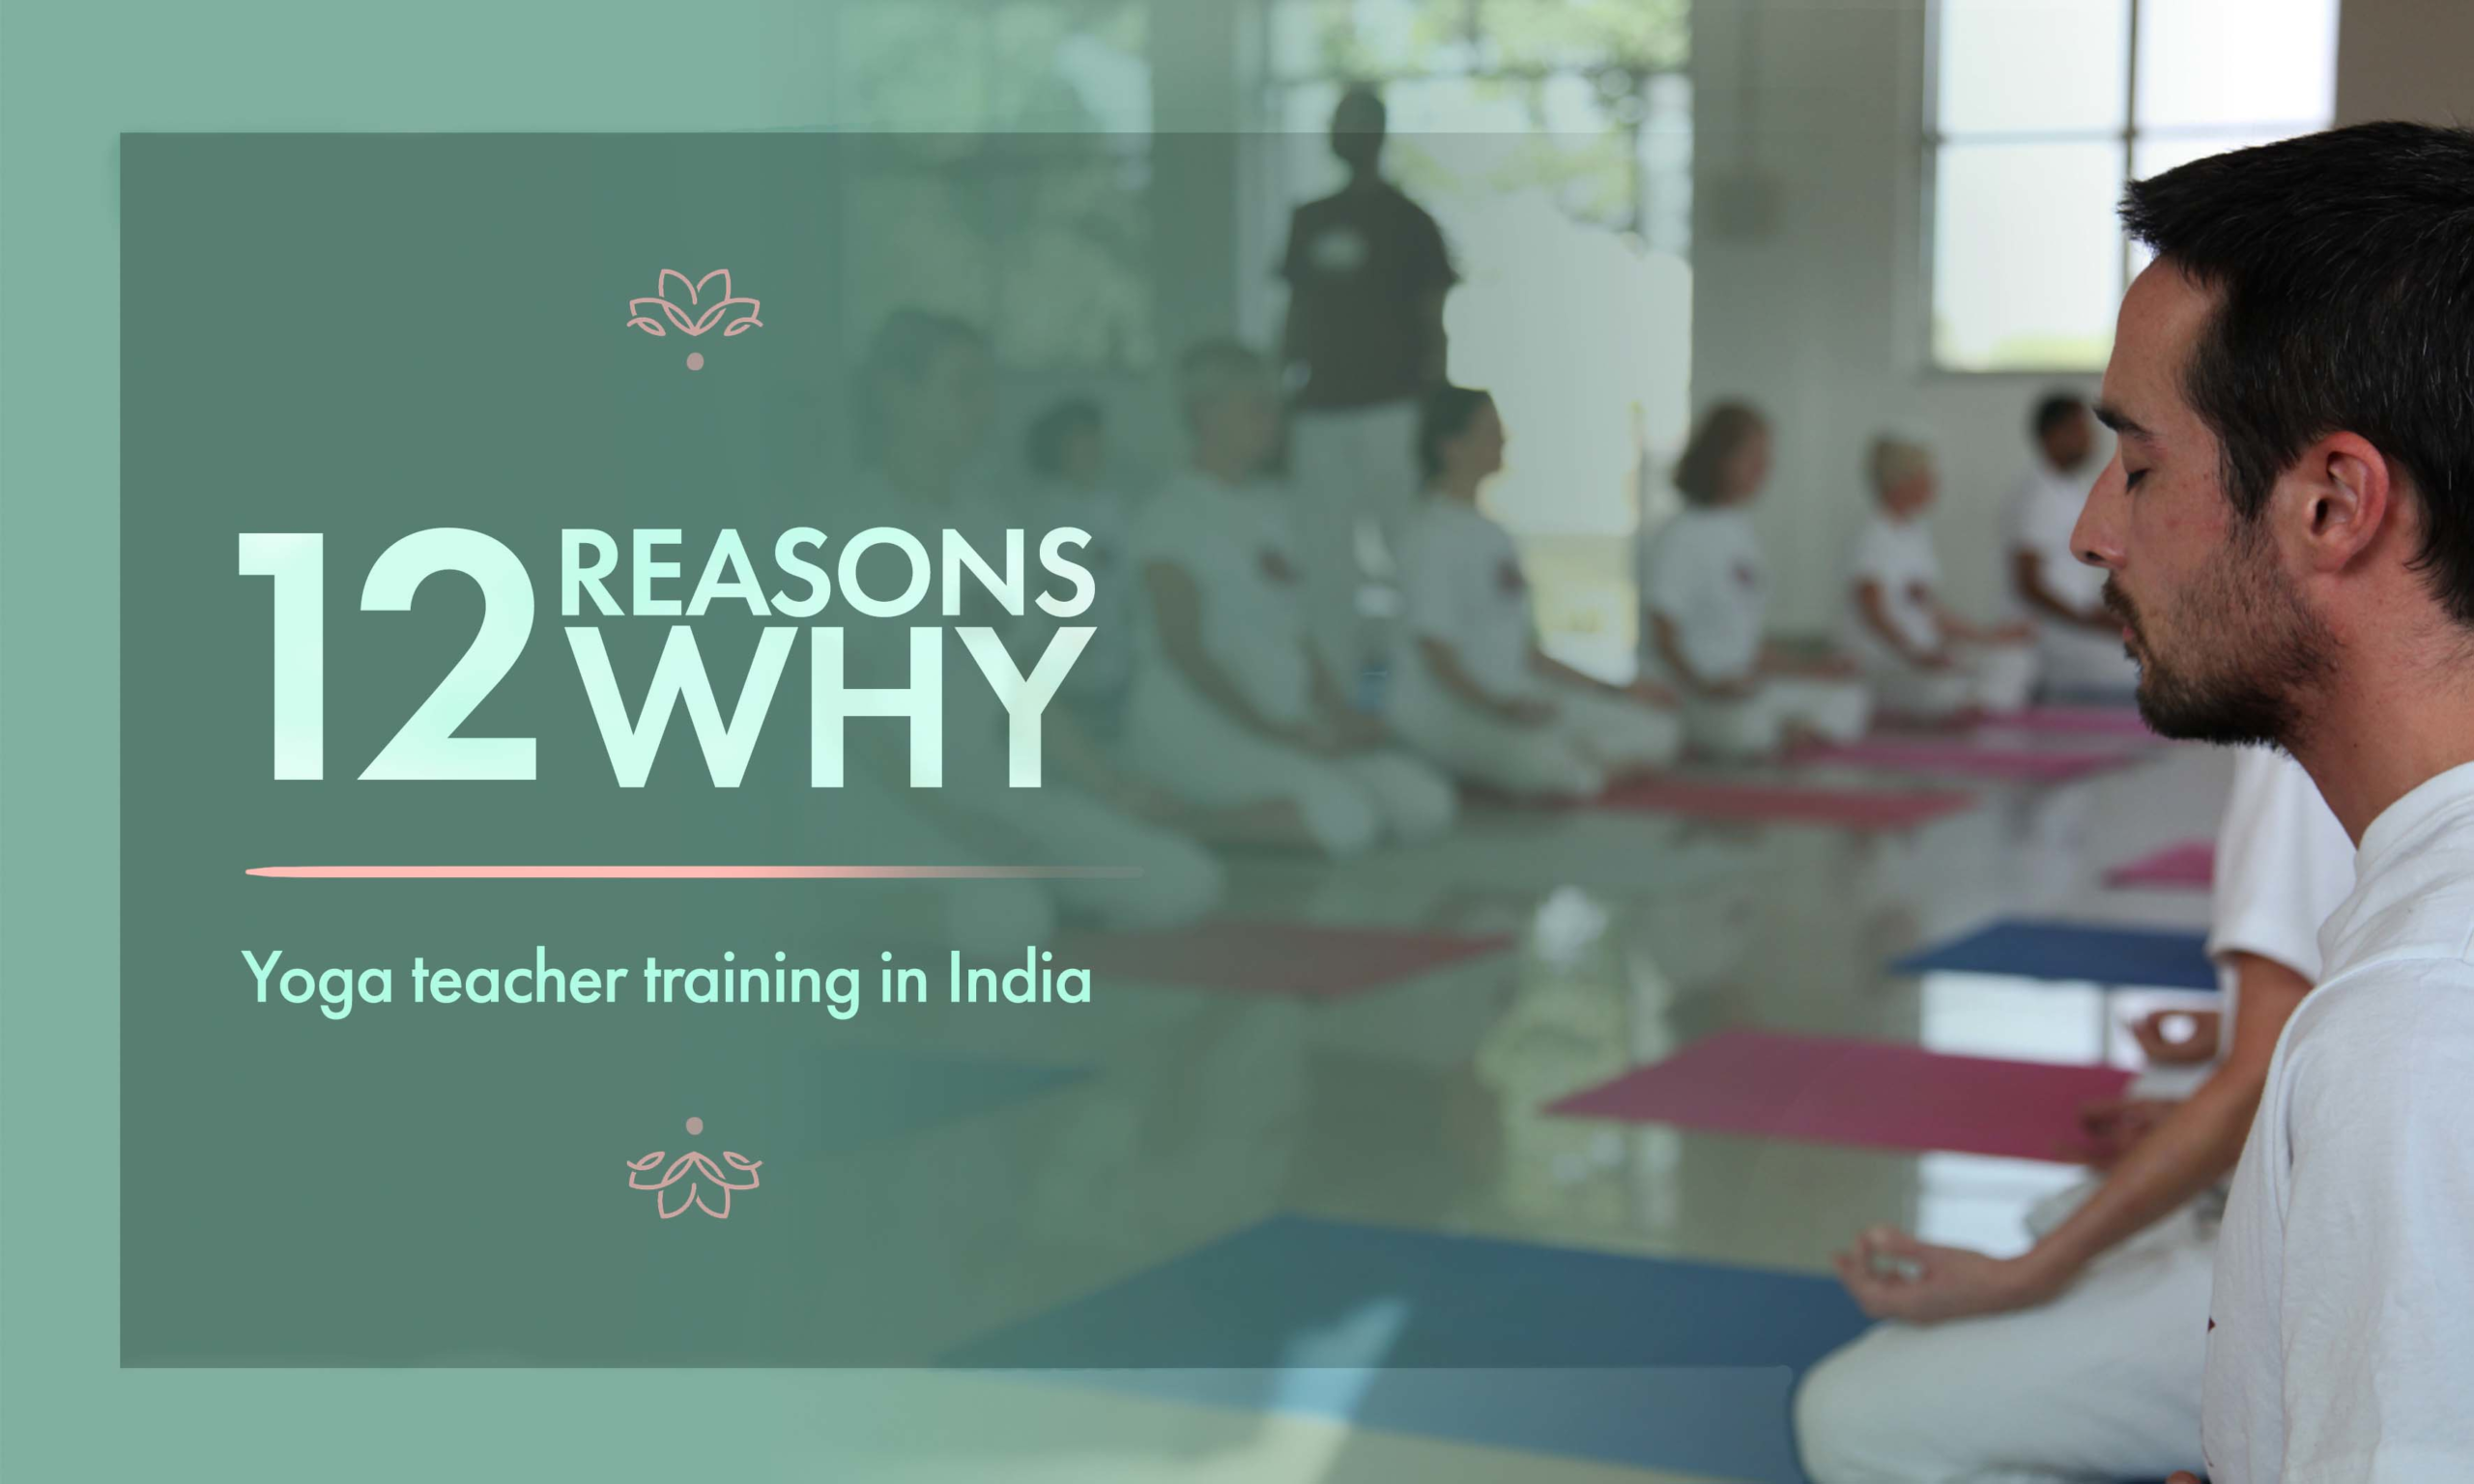 12 reasosn why you should do your yogat teacher training in India